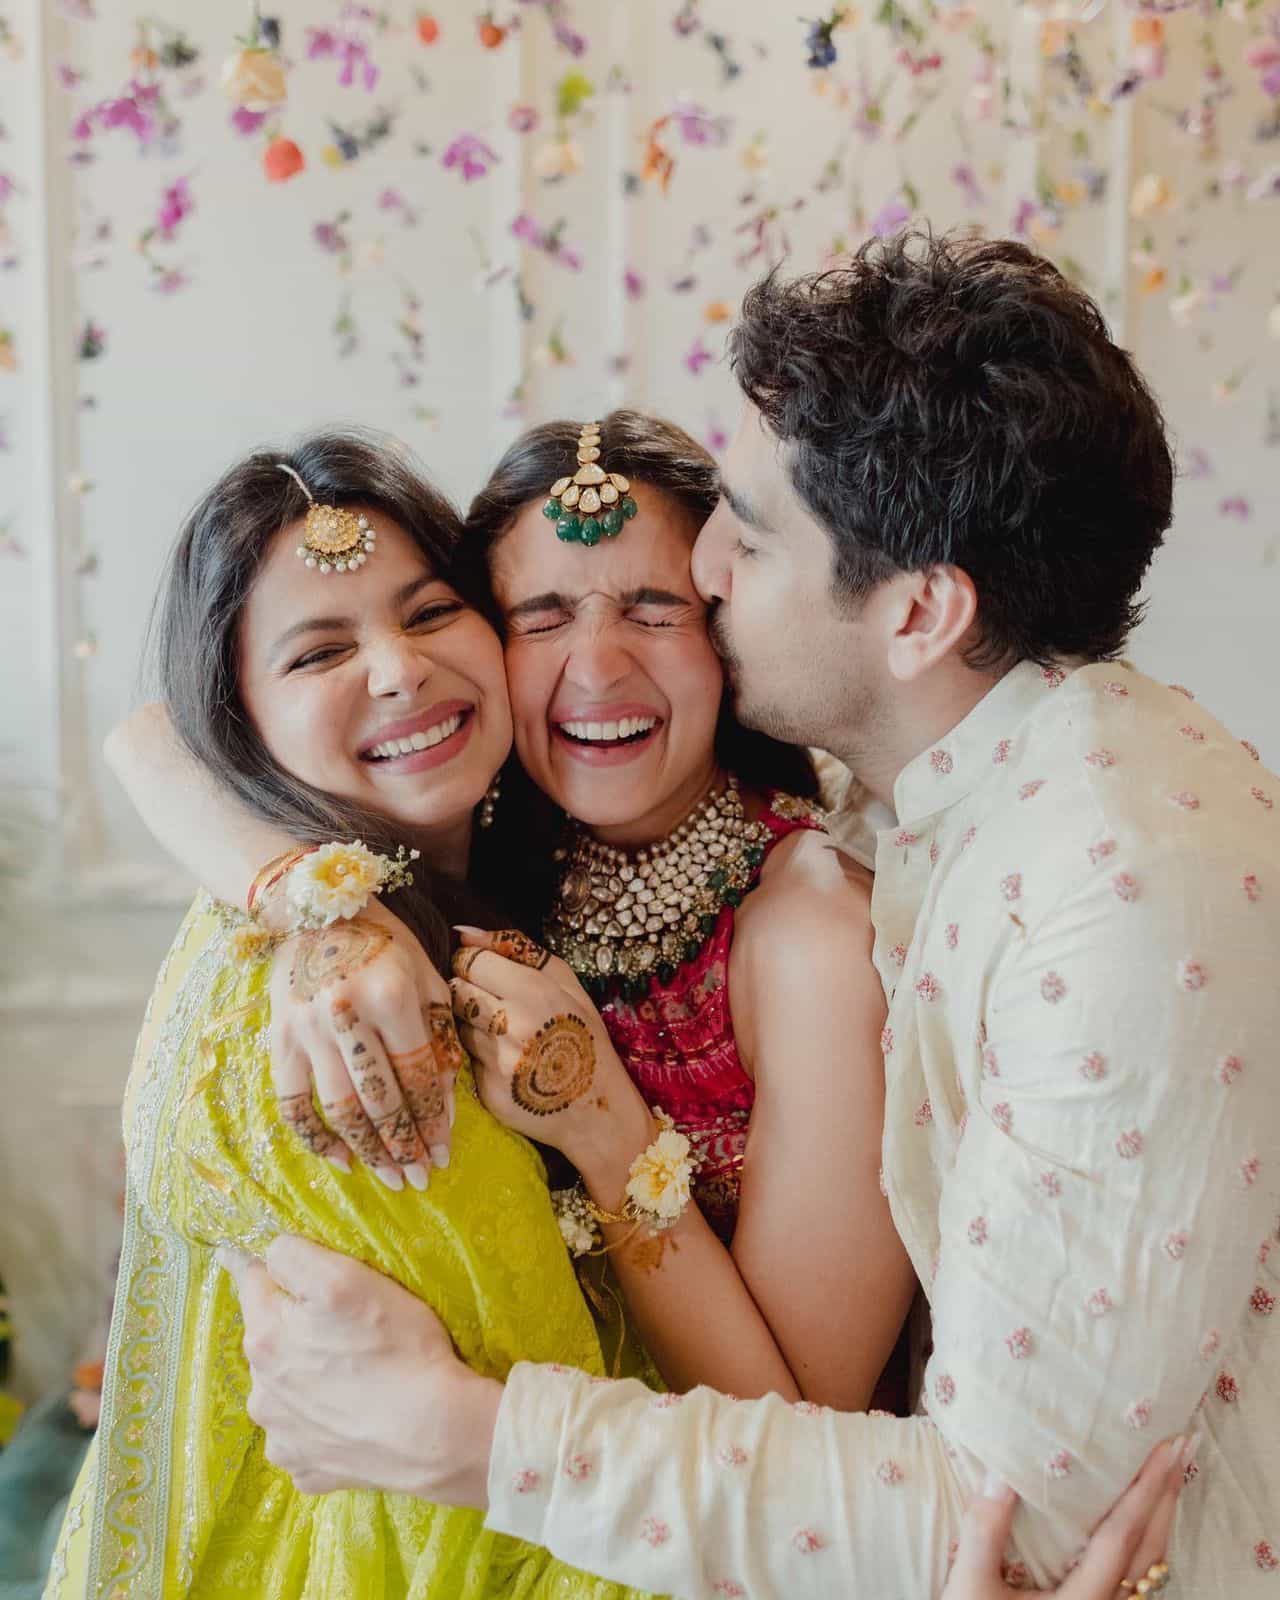 Brahmastra director and Alia-Ranbir's close friend Ayan Mukerji kissed the bride in this adorable picture.